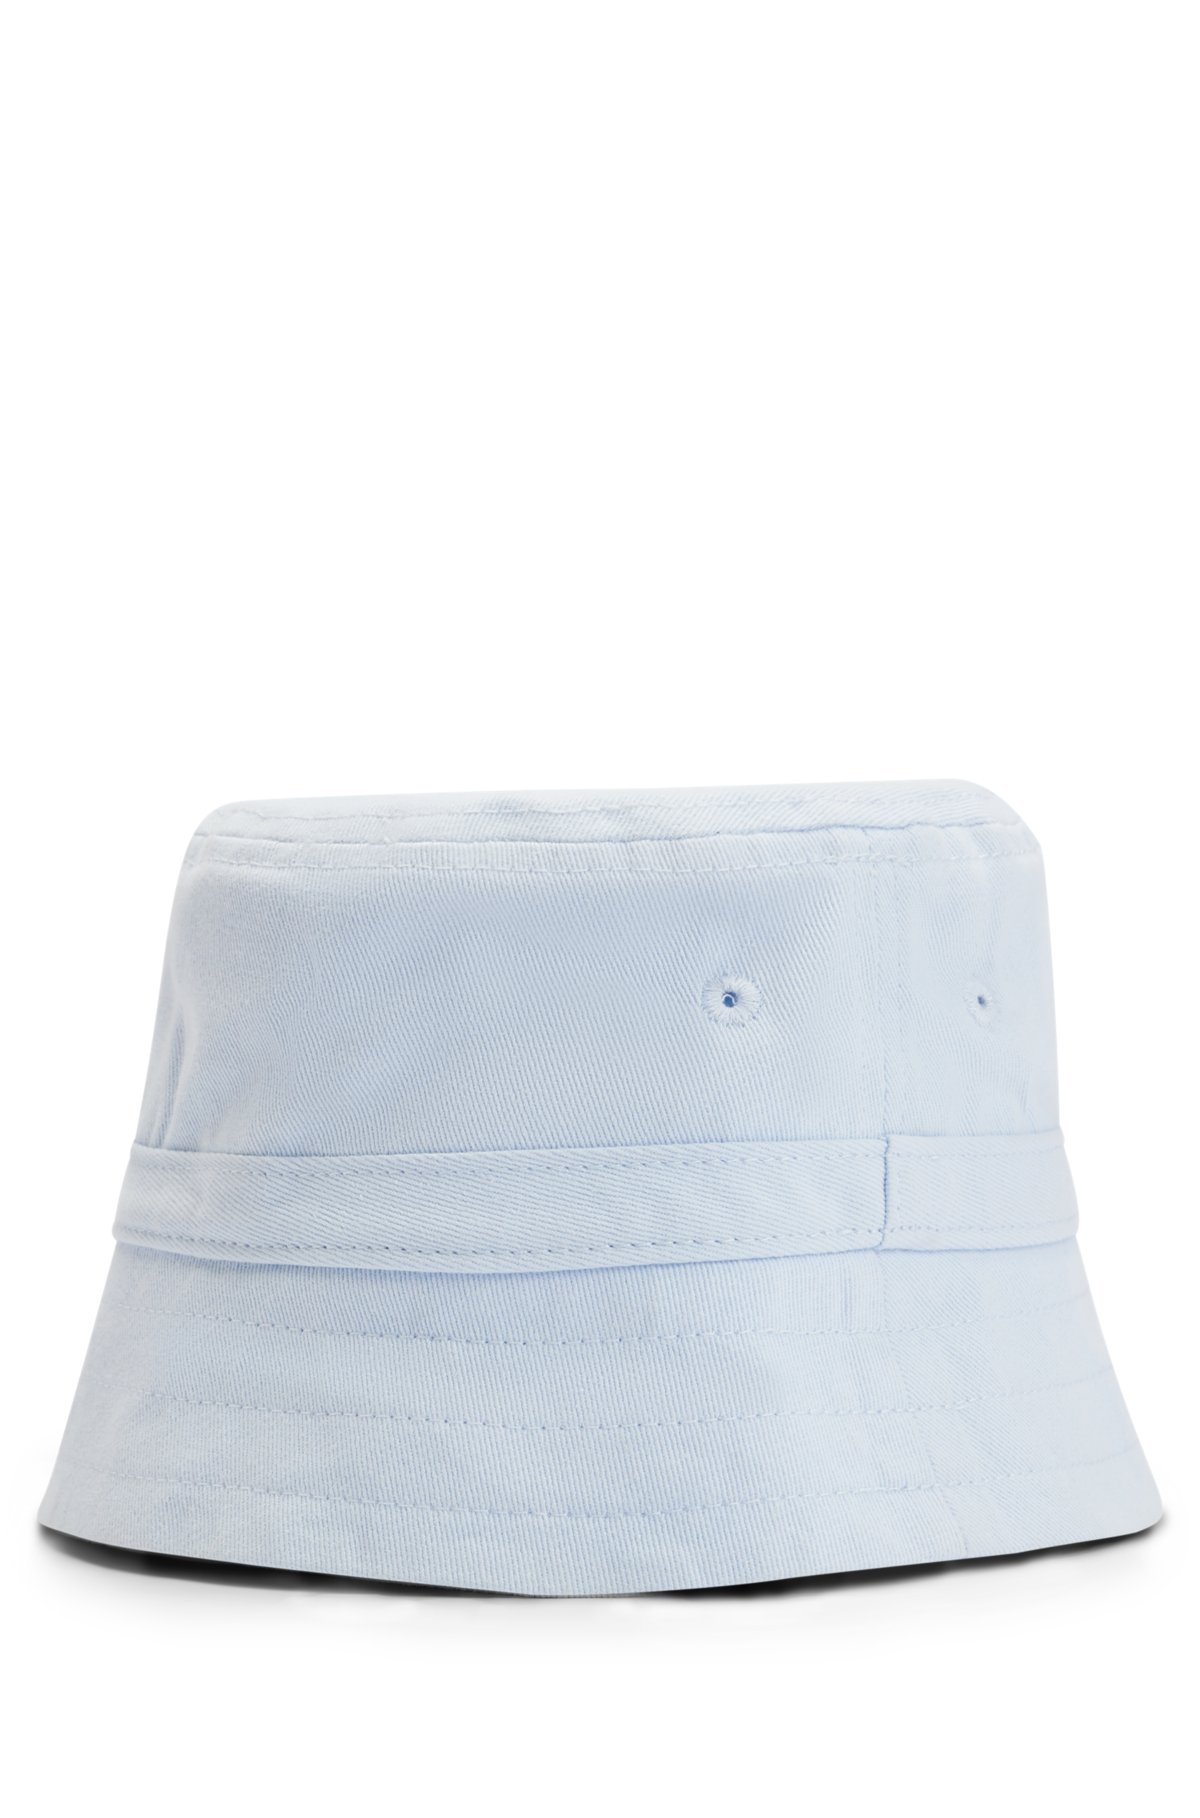 Baby bucket hat in cotton twill with logo print, Light Blue